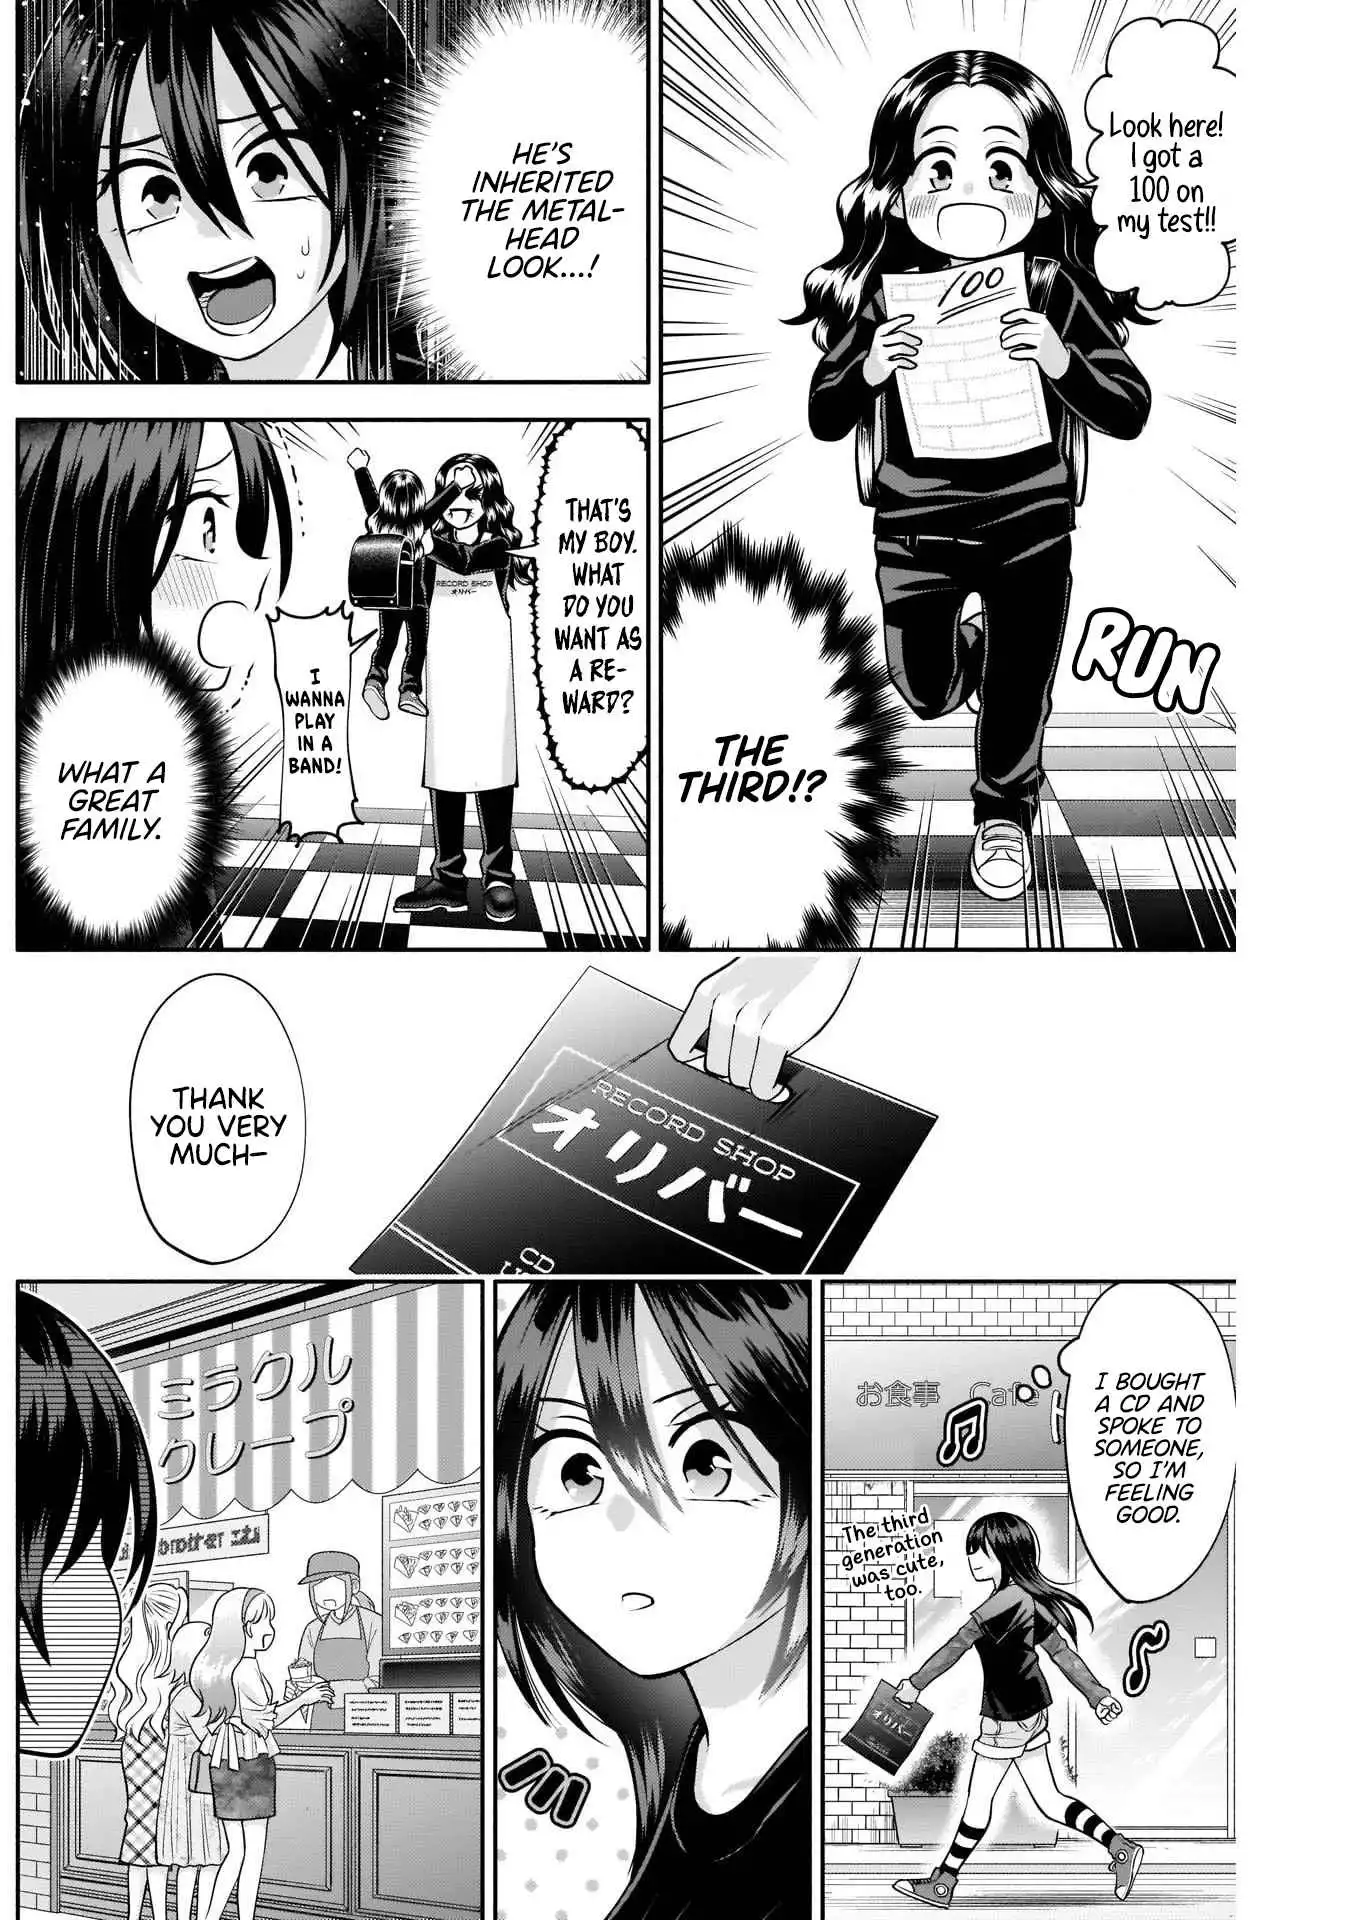 Shigure-San Wants to Shine! [ALL CHAPTERS] Chapter 13